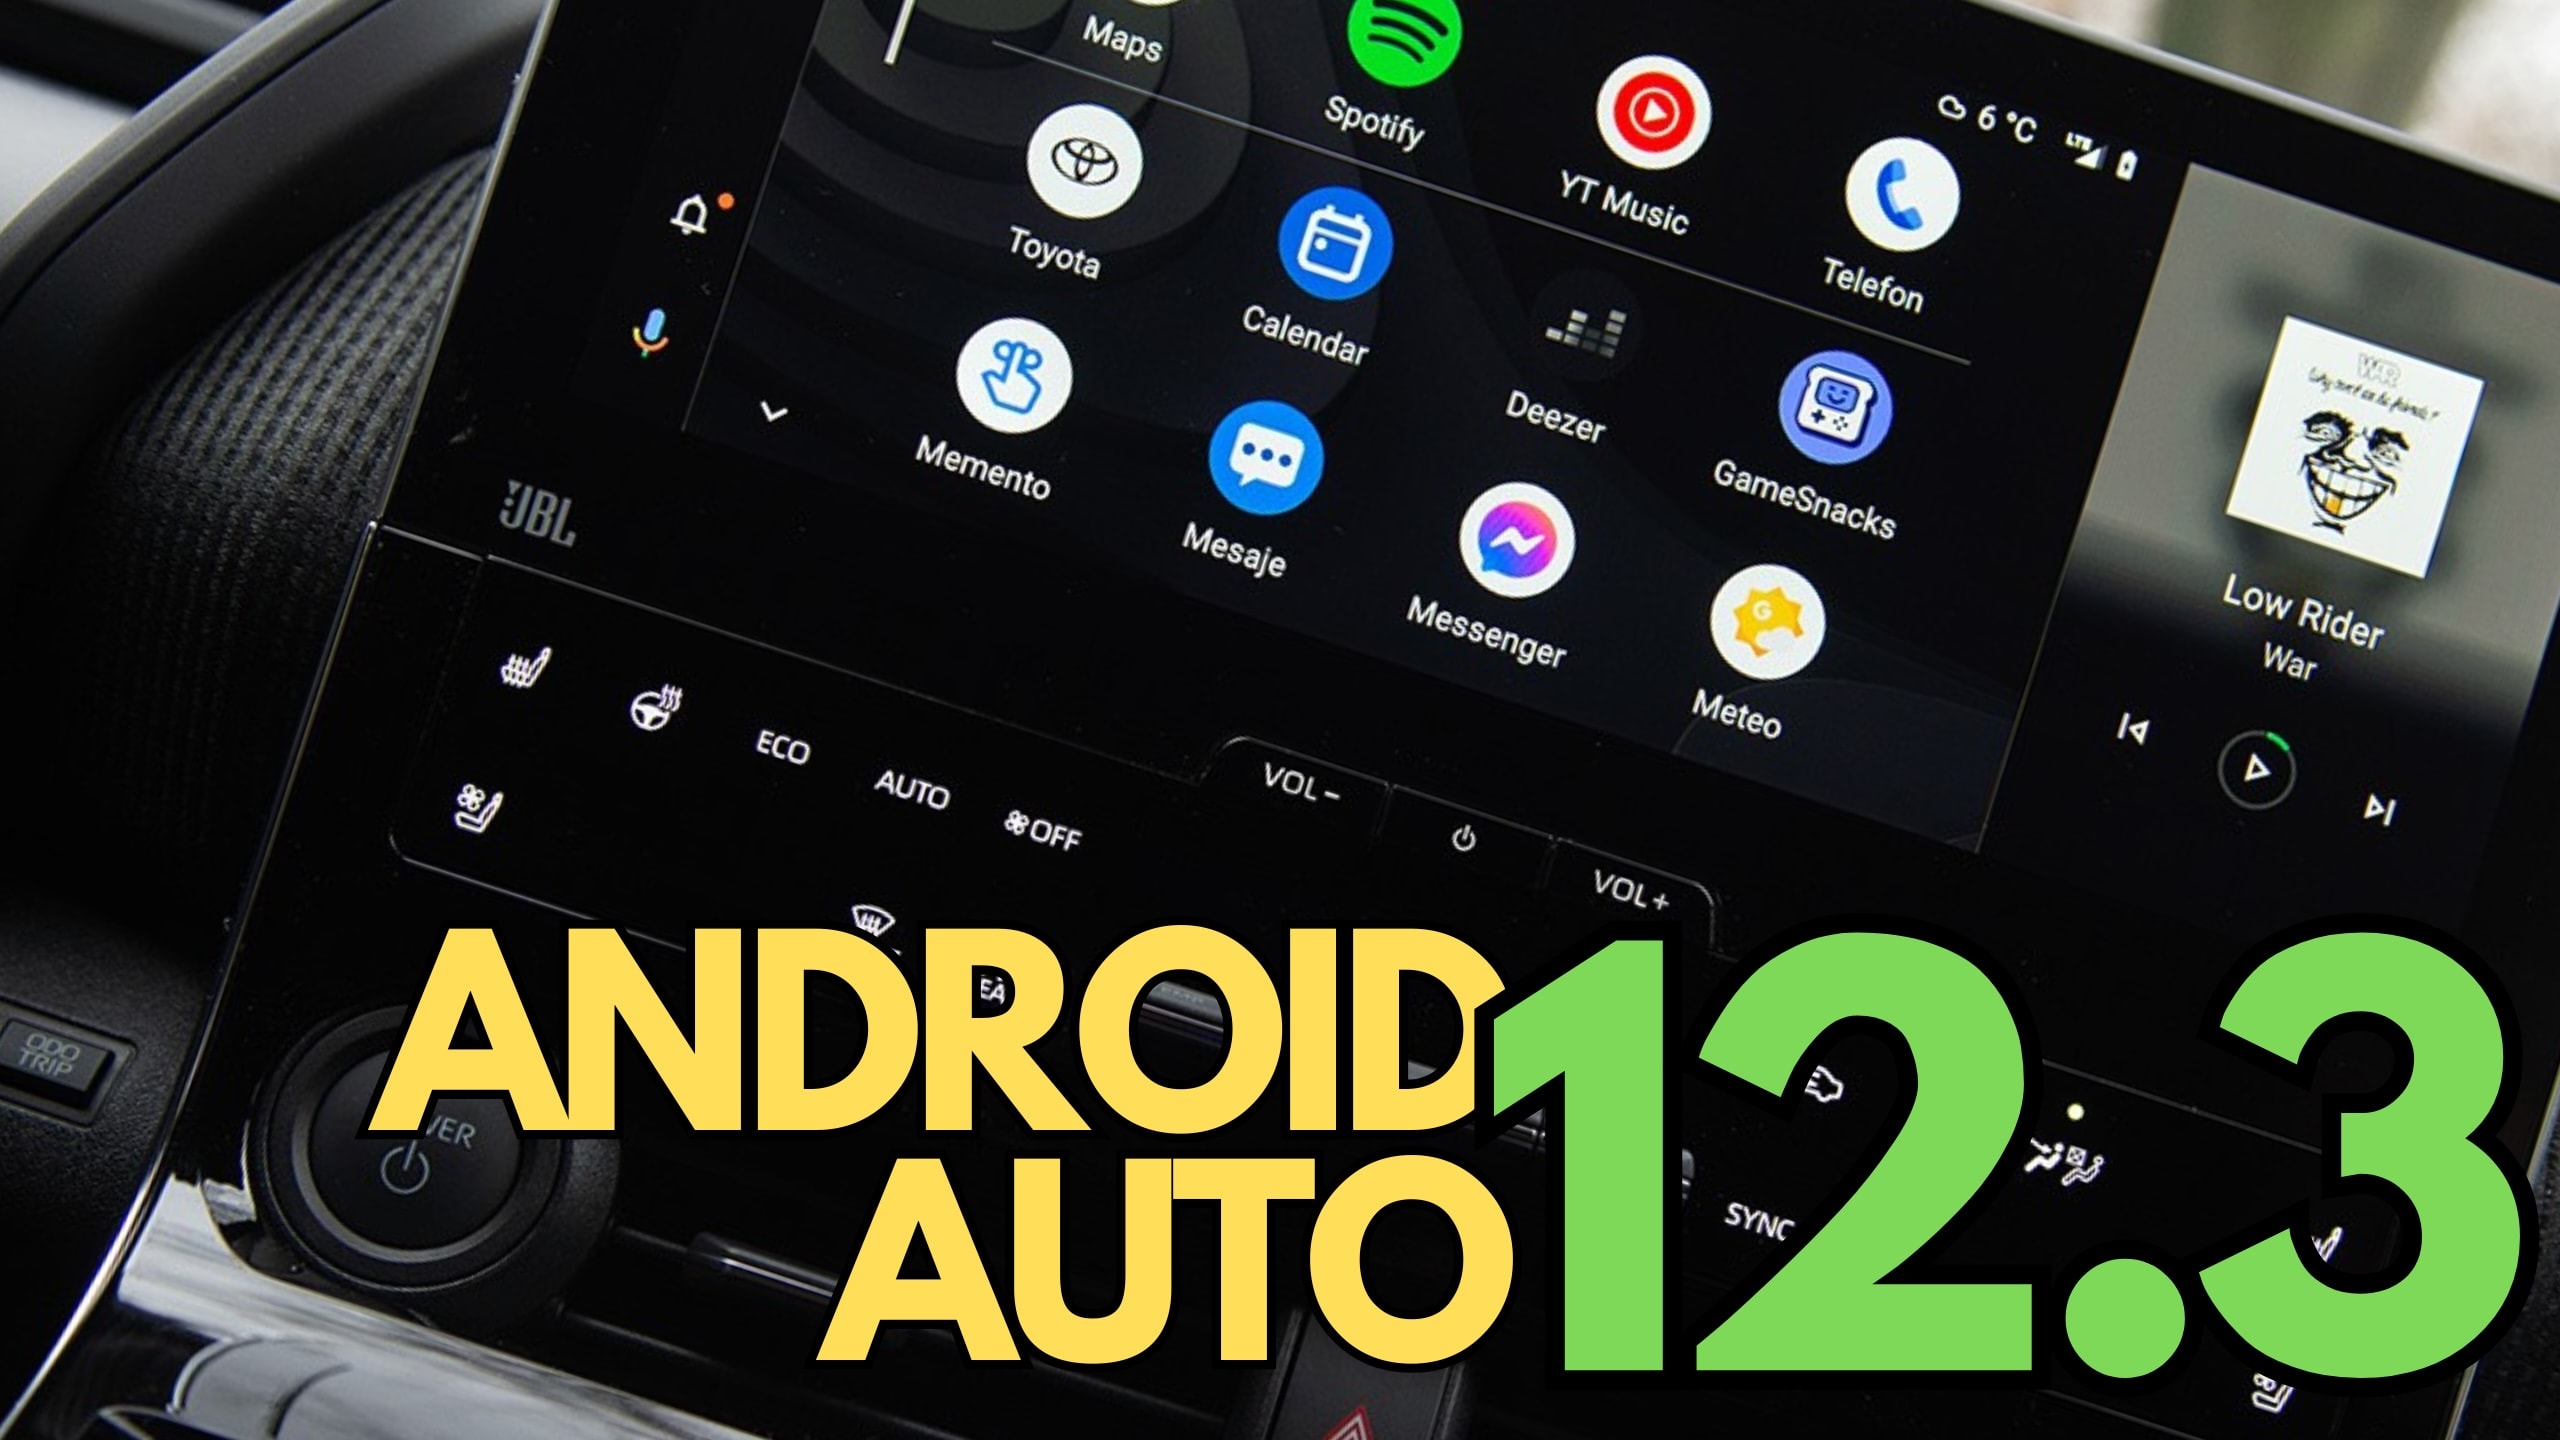 A new Android Auto is now available for all users